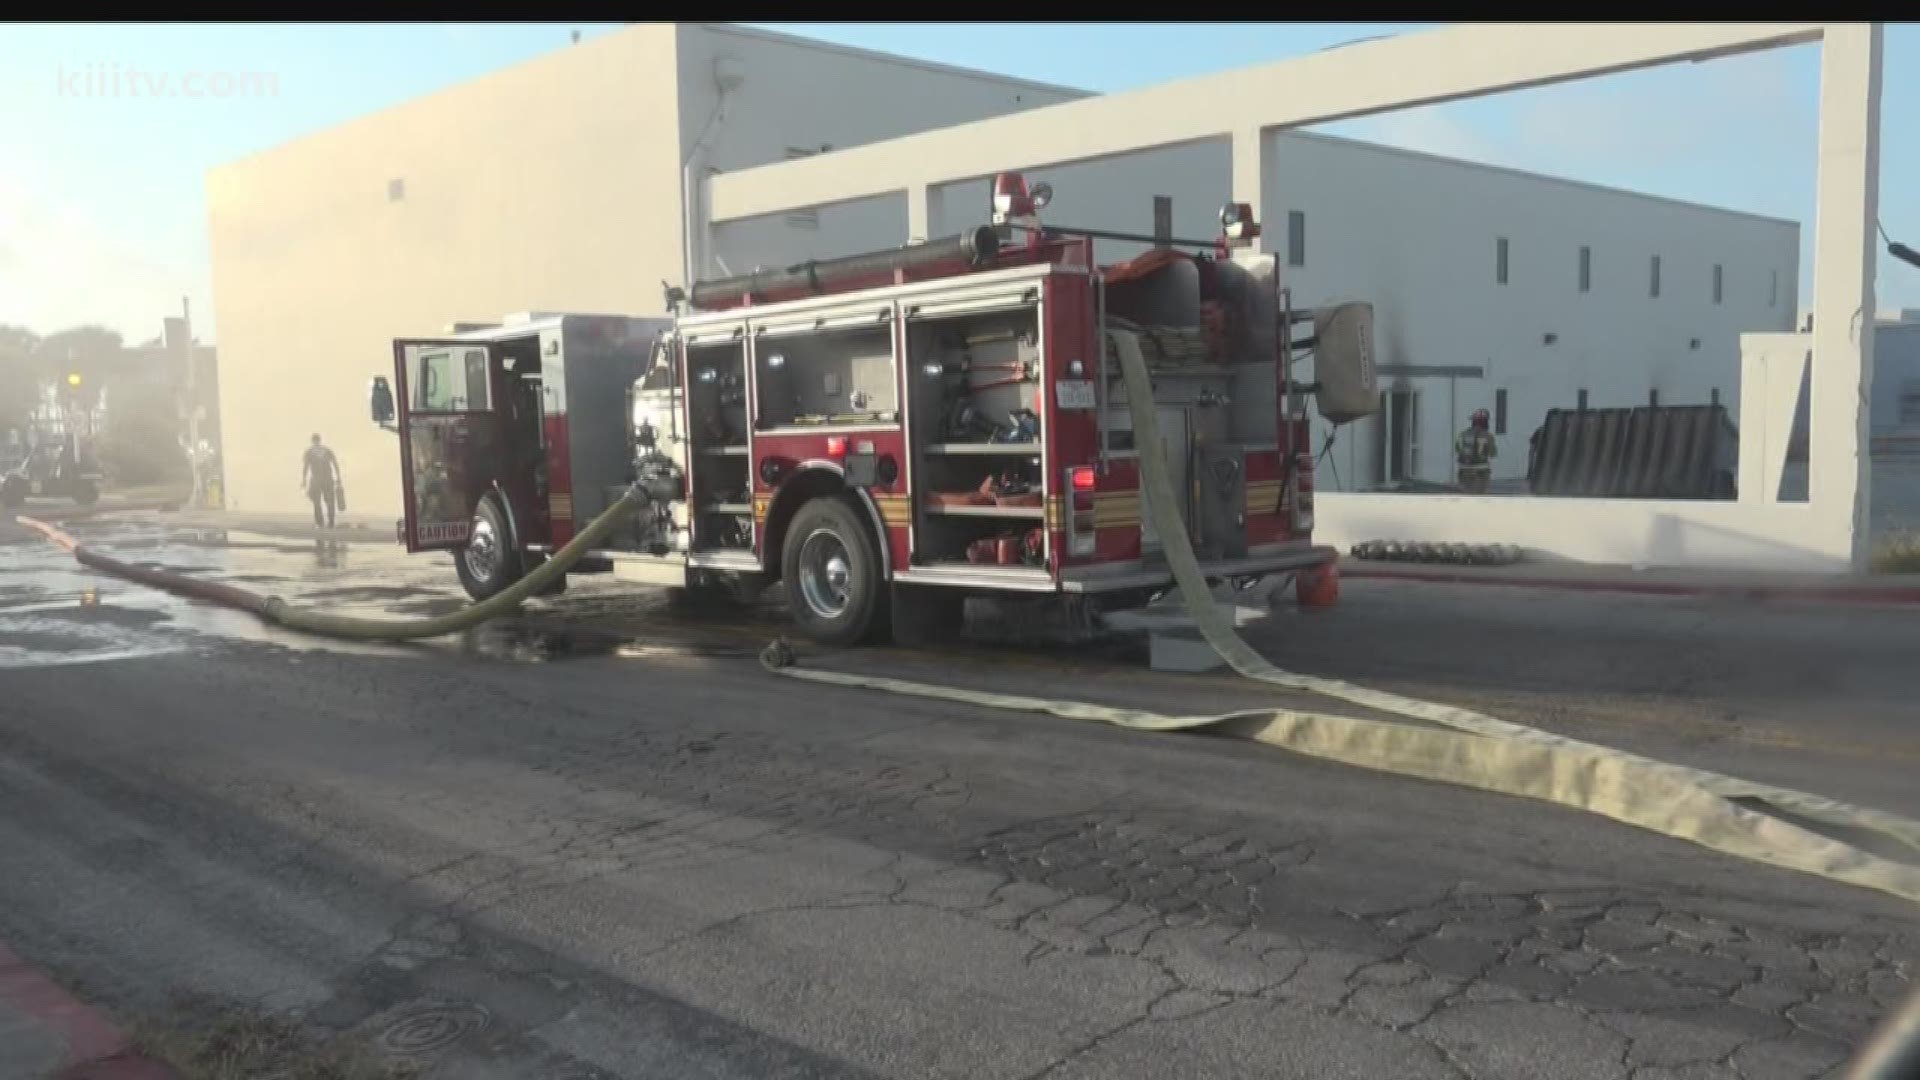 Crews ran a water line inside and were able to put it out and limit the damage to the building, which no one was living in according to Corpus Christi Fire Department Chief Robert Rocha.